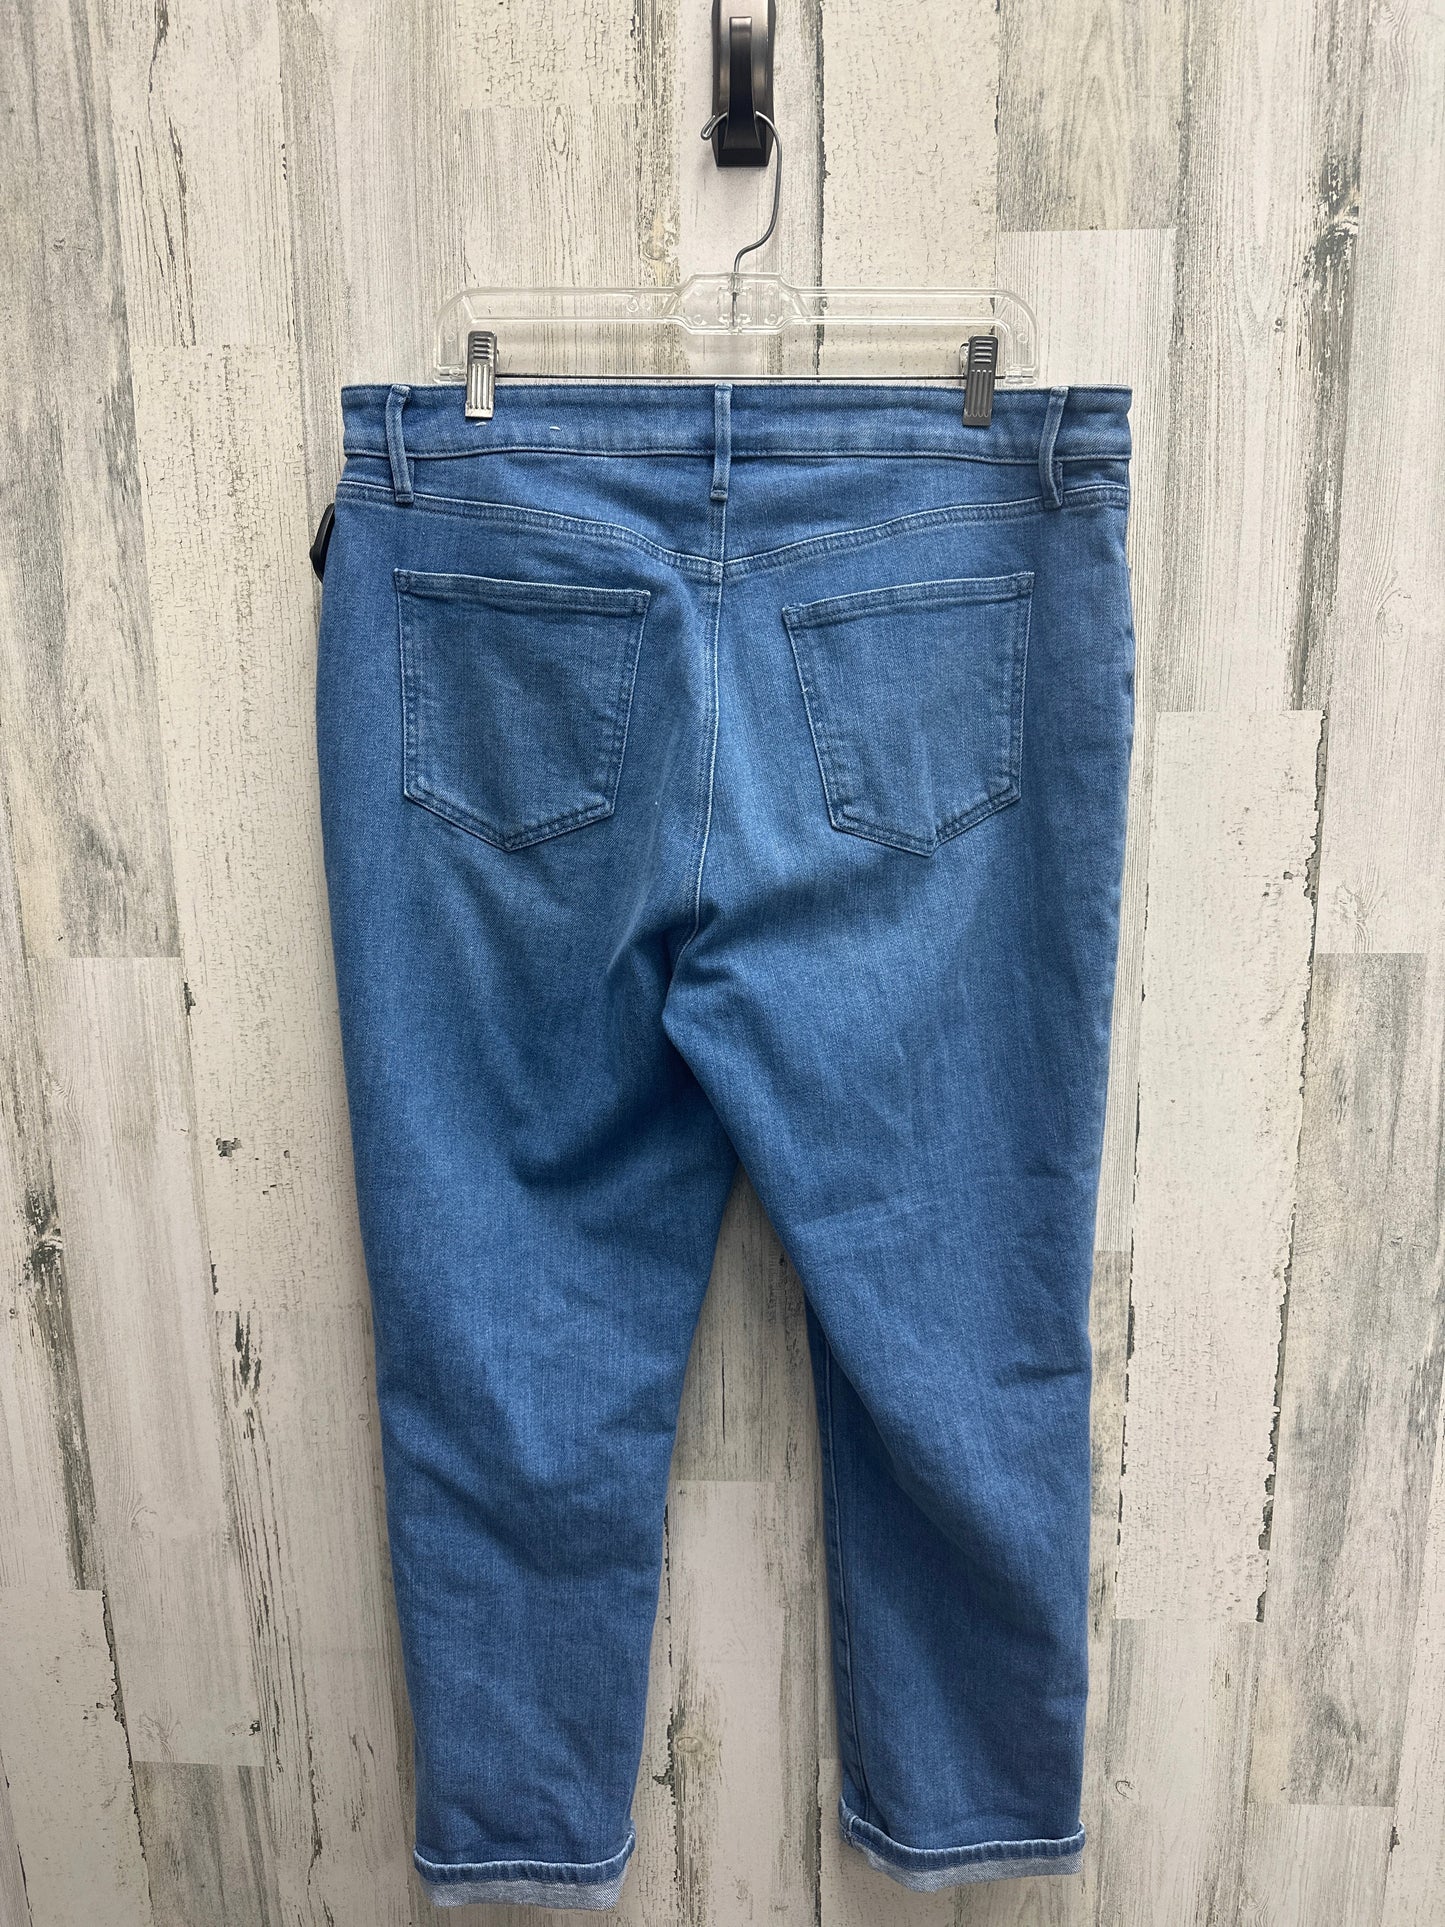 Jeans Skinny By Ann Taylor  Size: 14